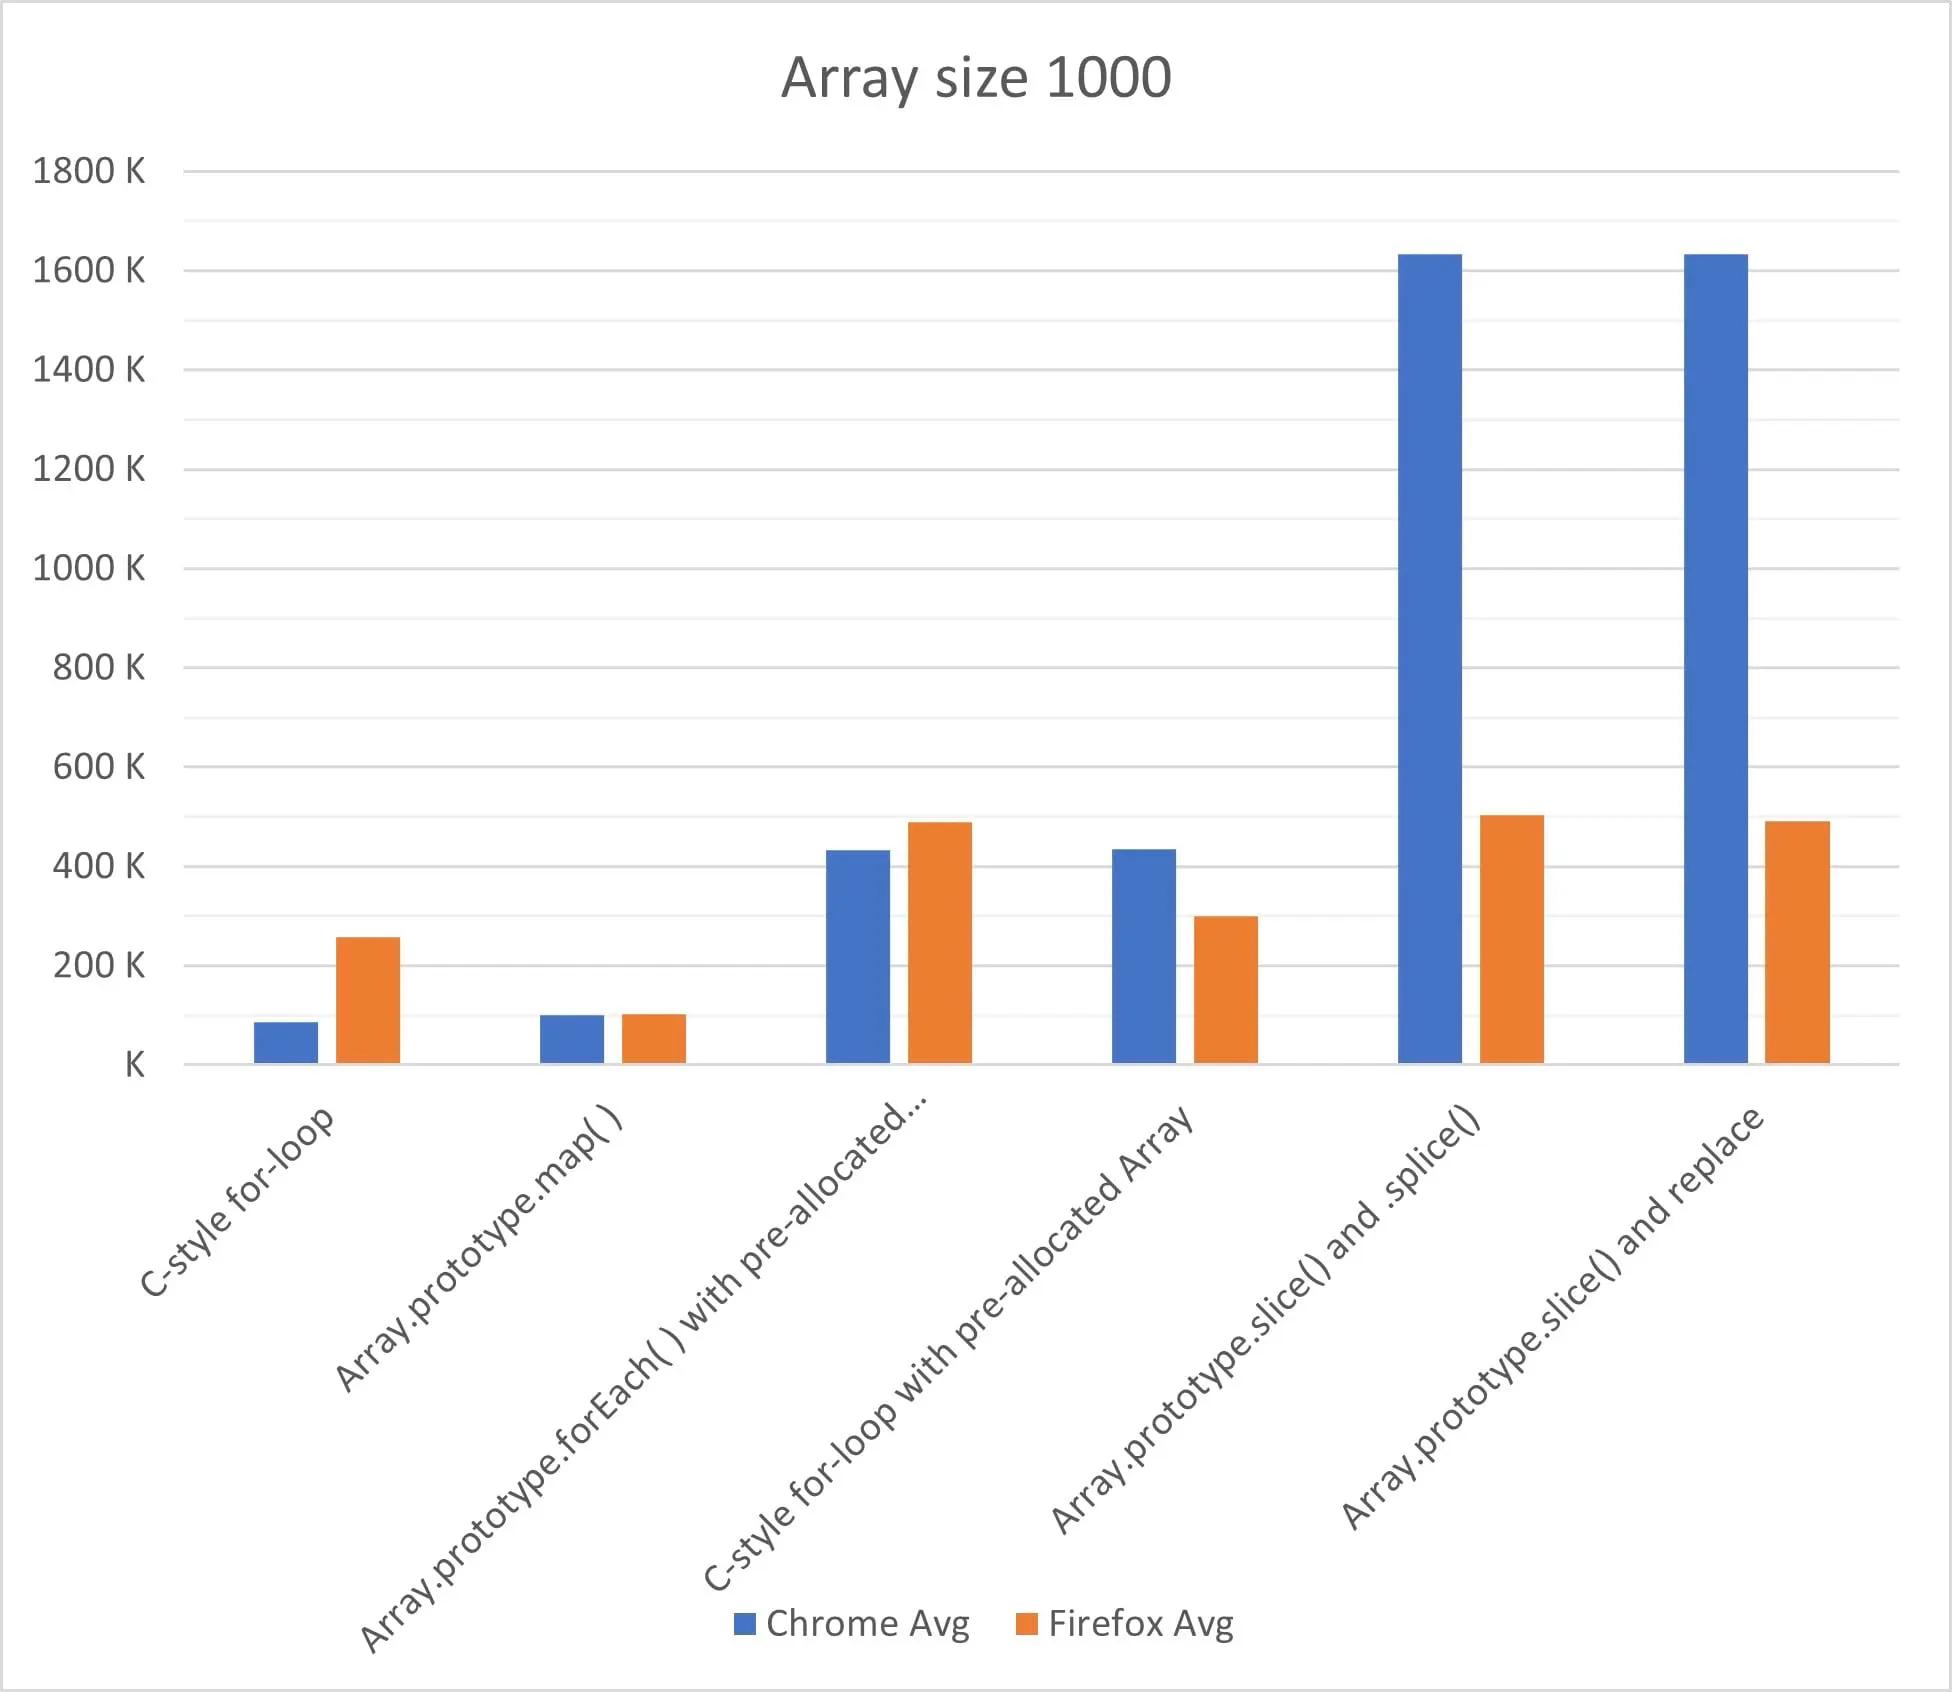 The two browsers compared at array size 1000